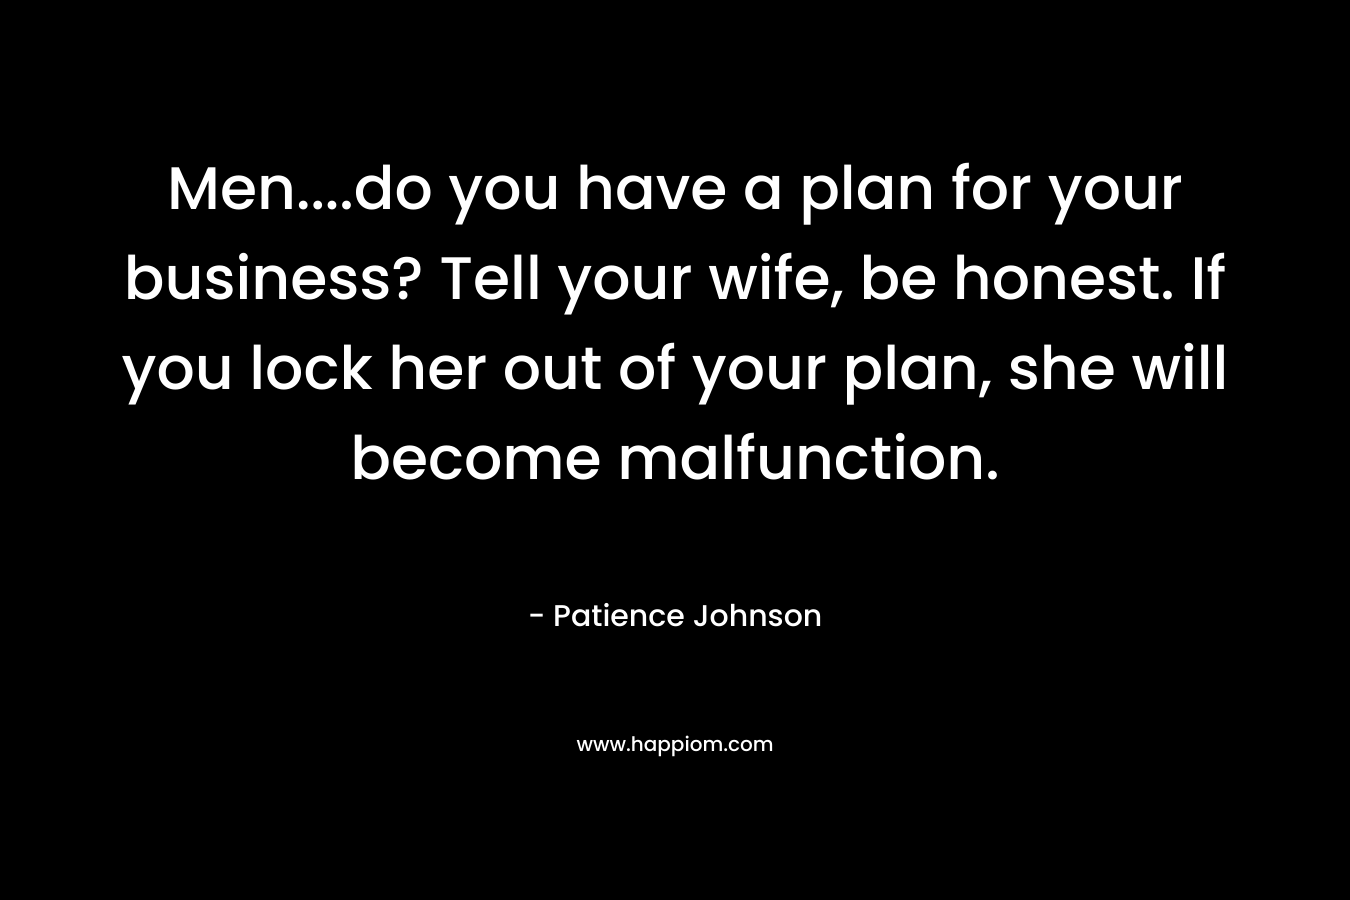 Men….do you have a plan for your business? Tell your wife, be honest. If you lock her out of your plan, she will become malfunction. – Patience Johnson